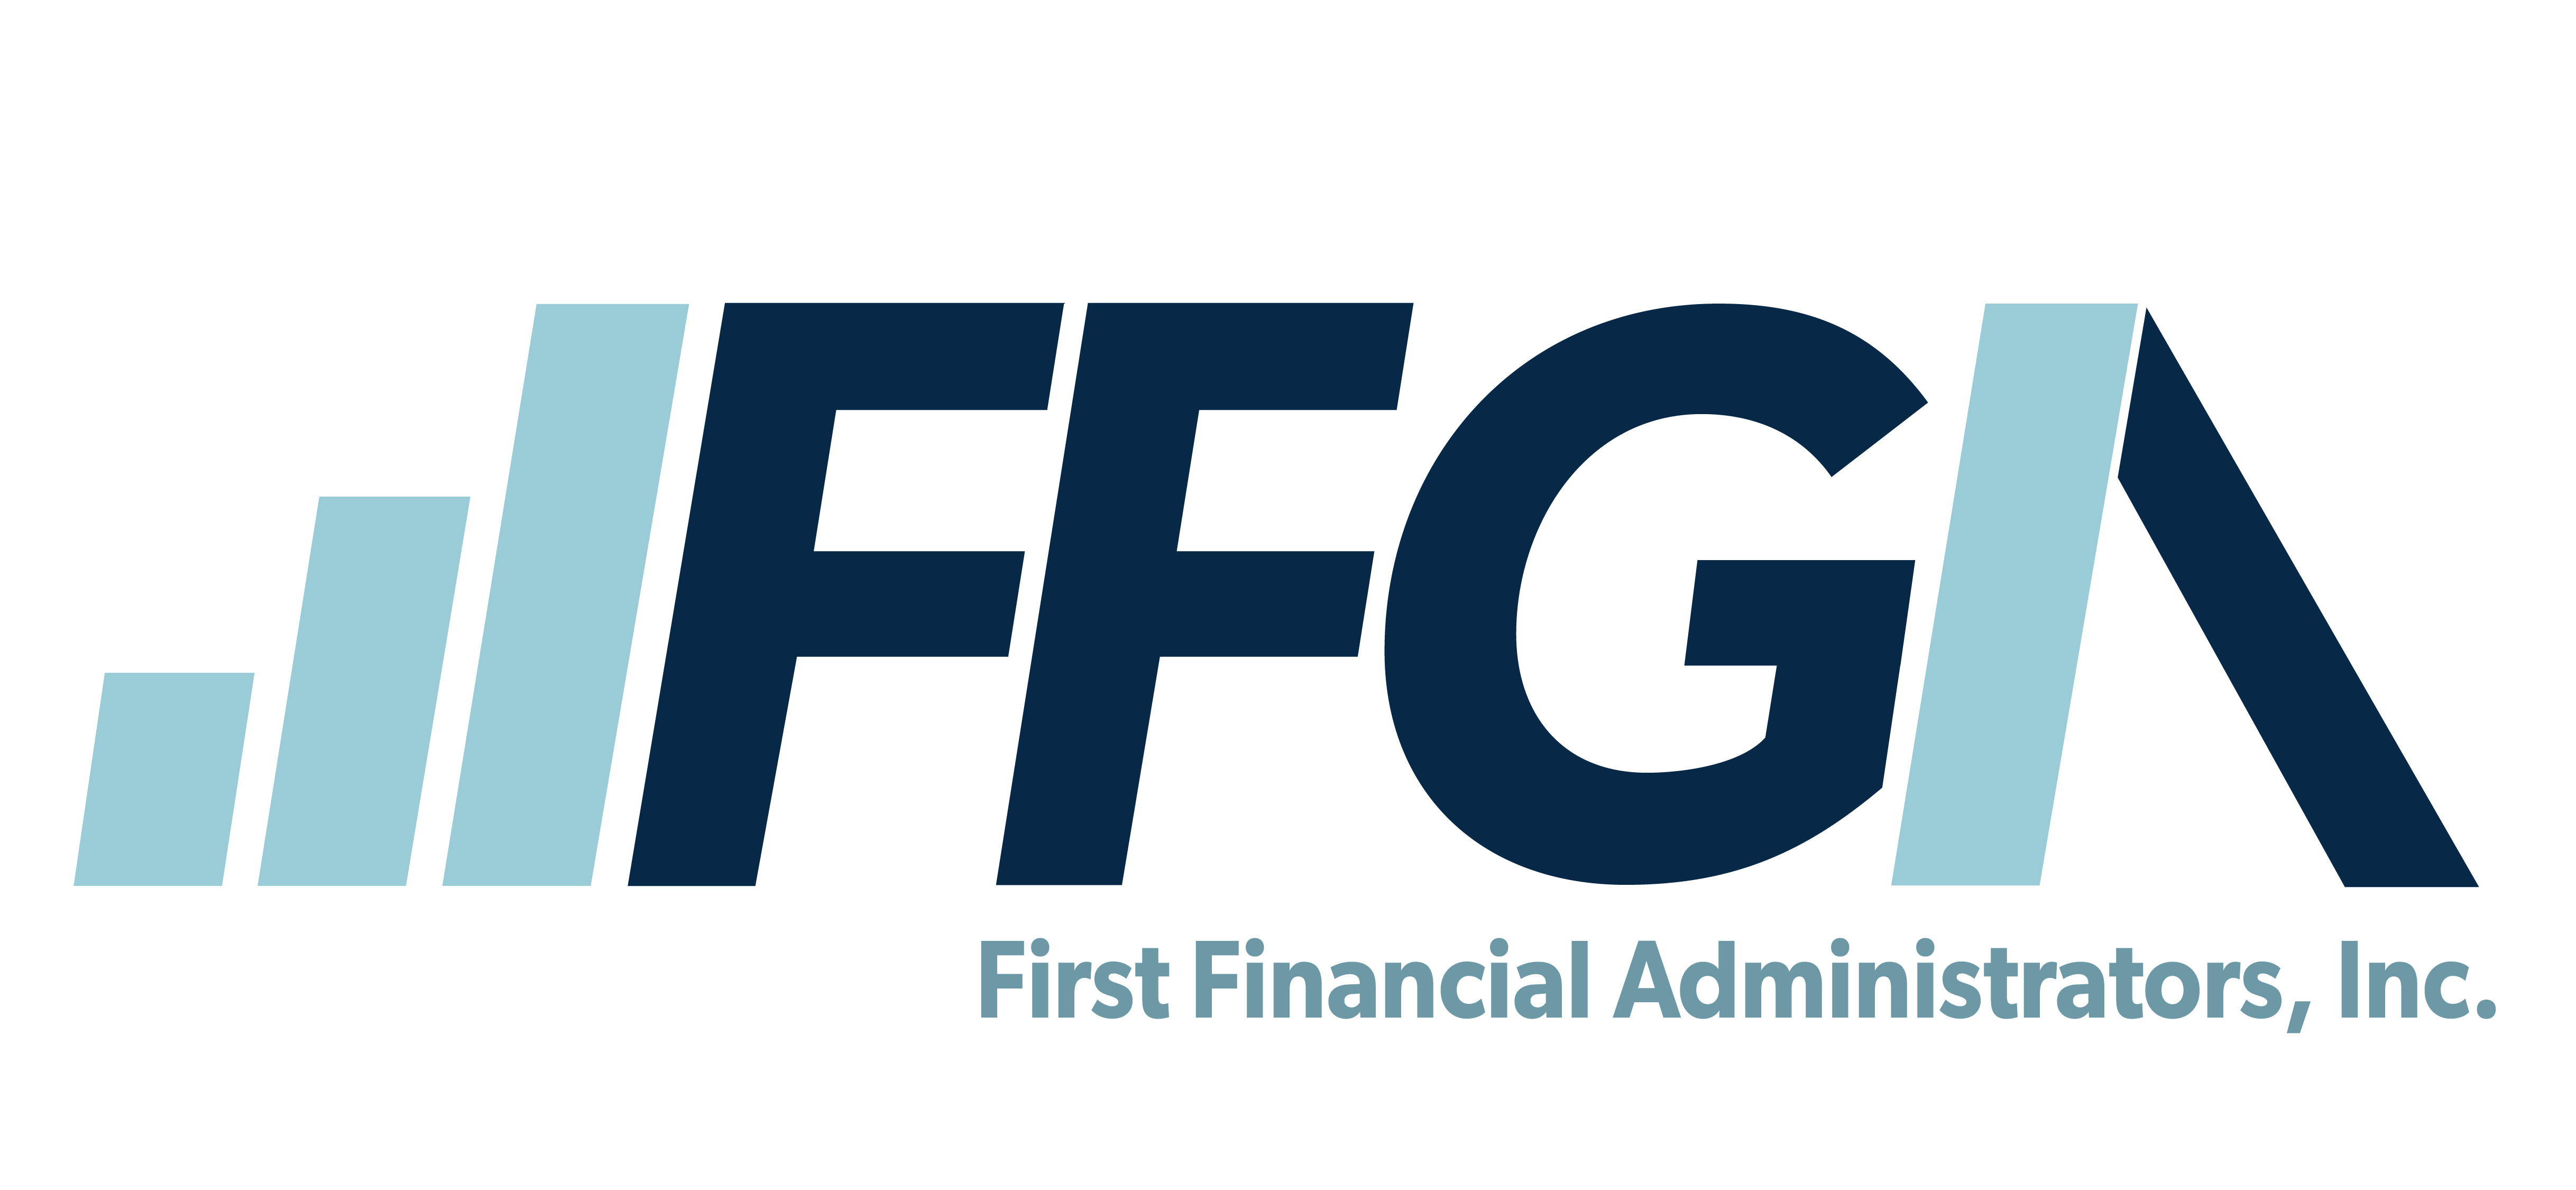 First Financial Administrators, Inc.